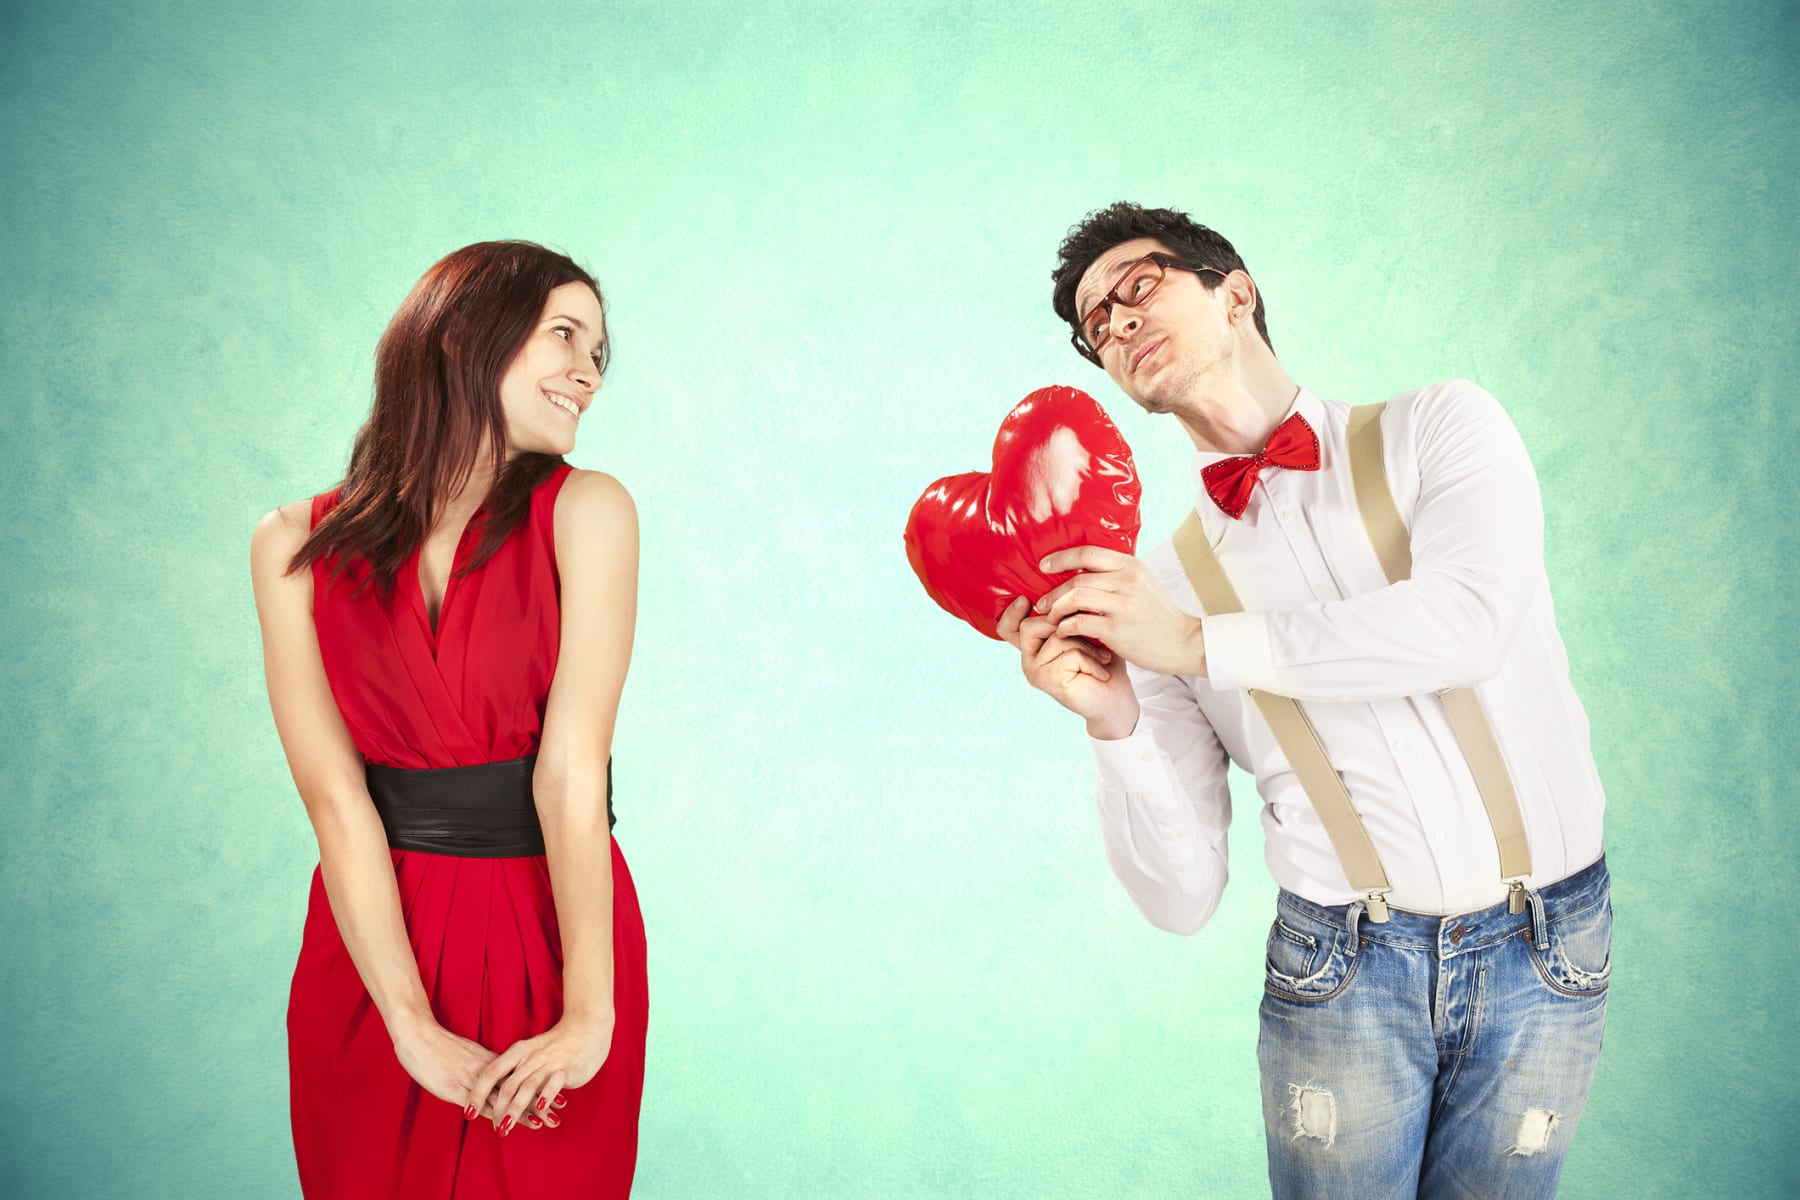 A woman looks at a man holding a heart.